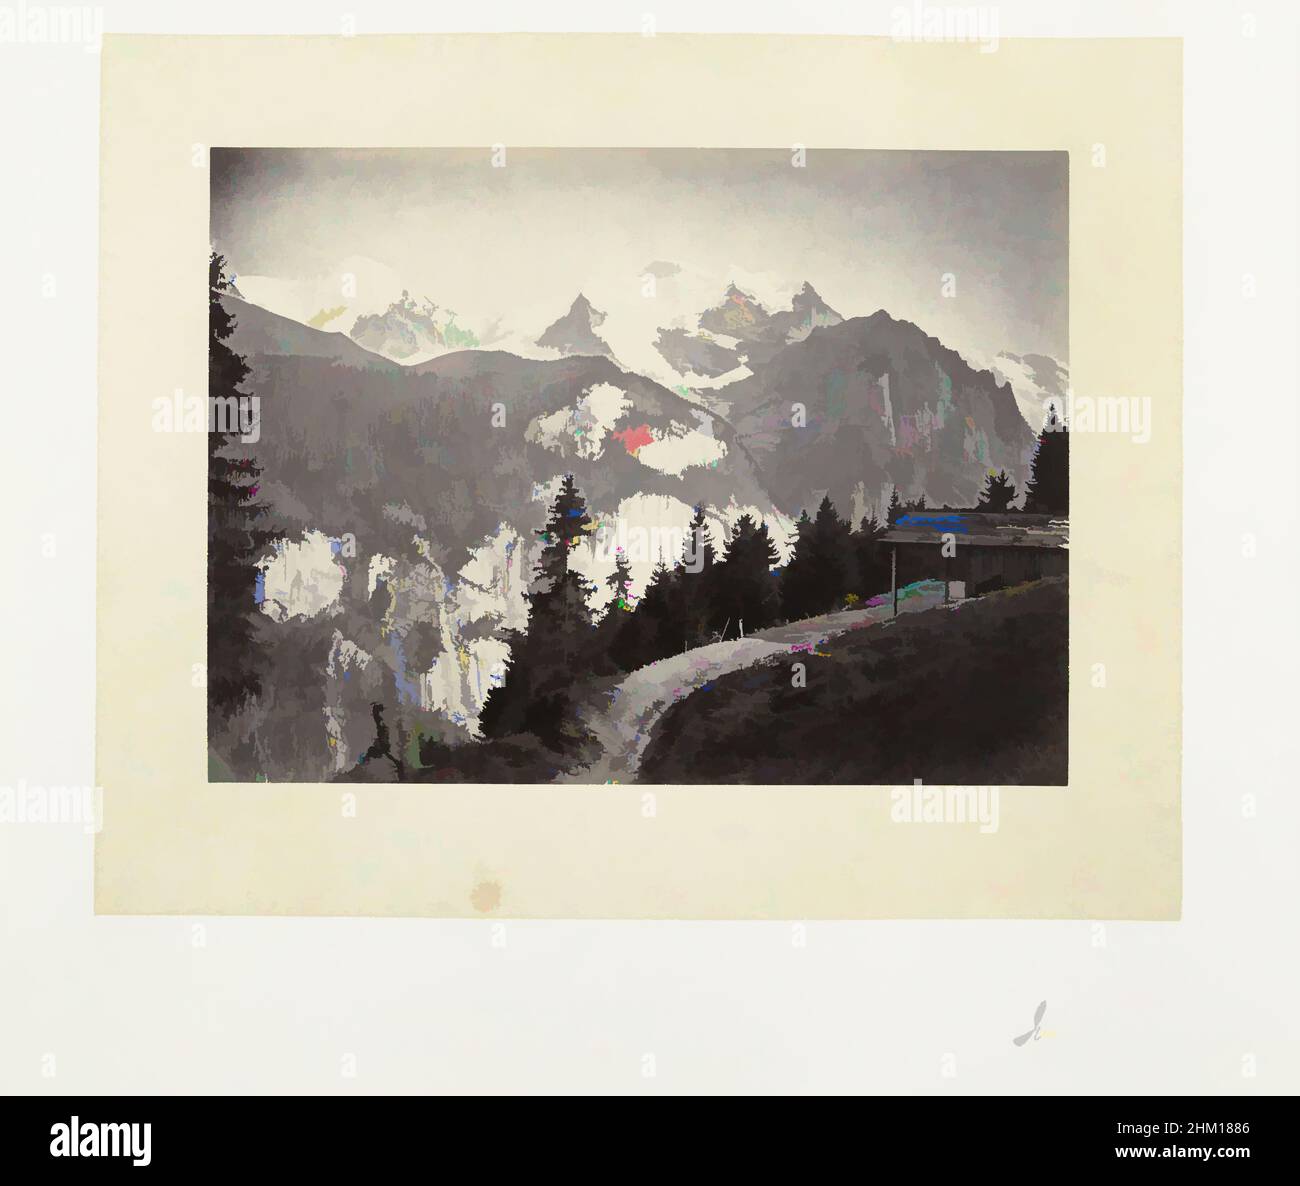 Art Inspired by View of the Jungfrau, Jungfrau, Views of Switzerland and  Savoy, William England, Verlag: A. Marion Son & Co., Berner Alpen, Verlag:  London, 1863 - 1865, paper, Karton, Albumendruck, Höhe